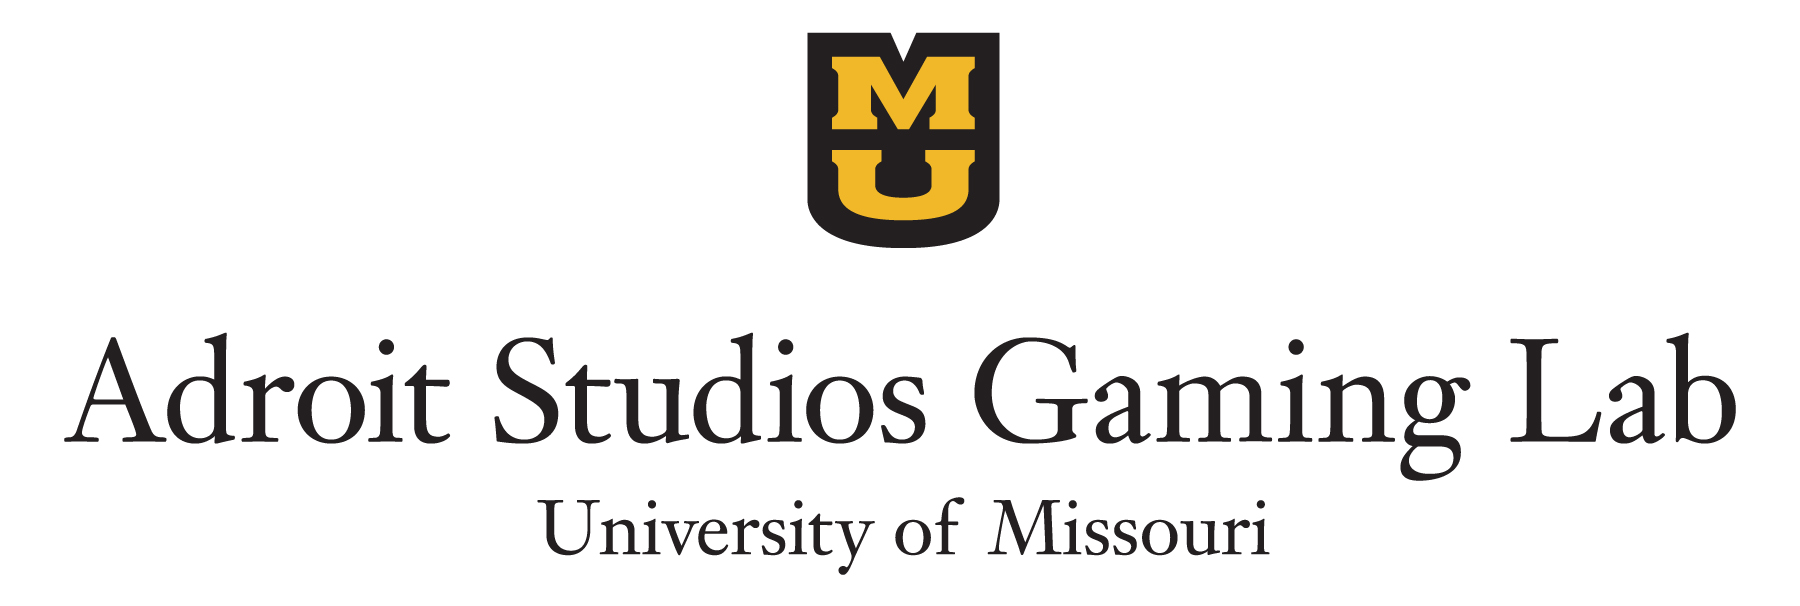 Adroit Studios Gaming Lab logo, School of Information Science & Learning Technologies, University of Missouri College of Education